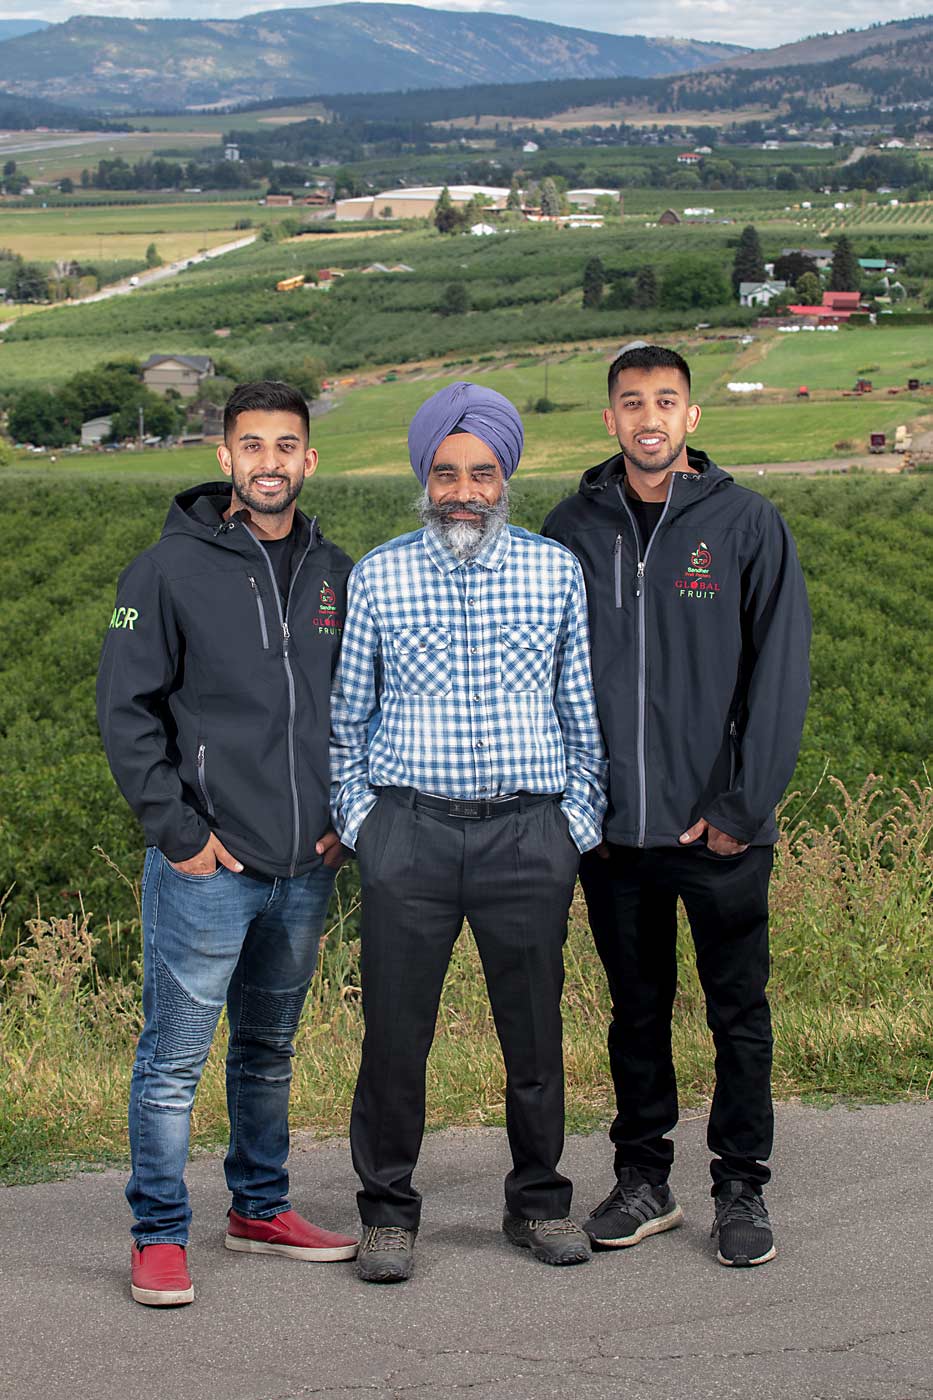 Bill Sandher and his sons, Gurtaj, left, and Prabtaj, with their growing farm and packing facility in the far background. (TJ Mullinax/Good Fruit Grower)